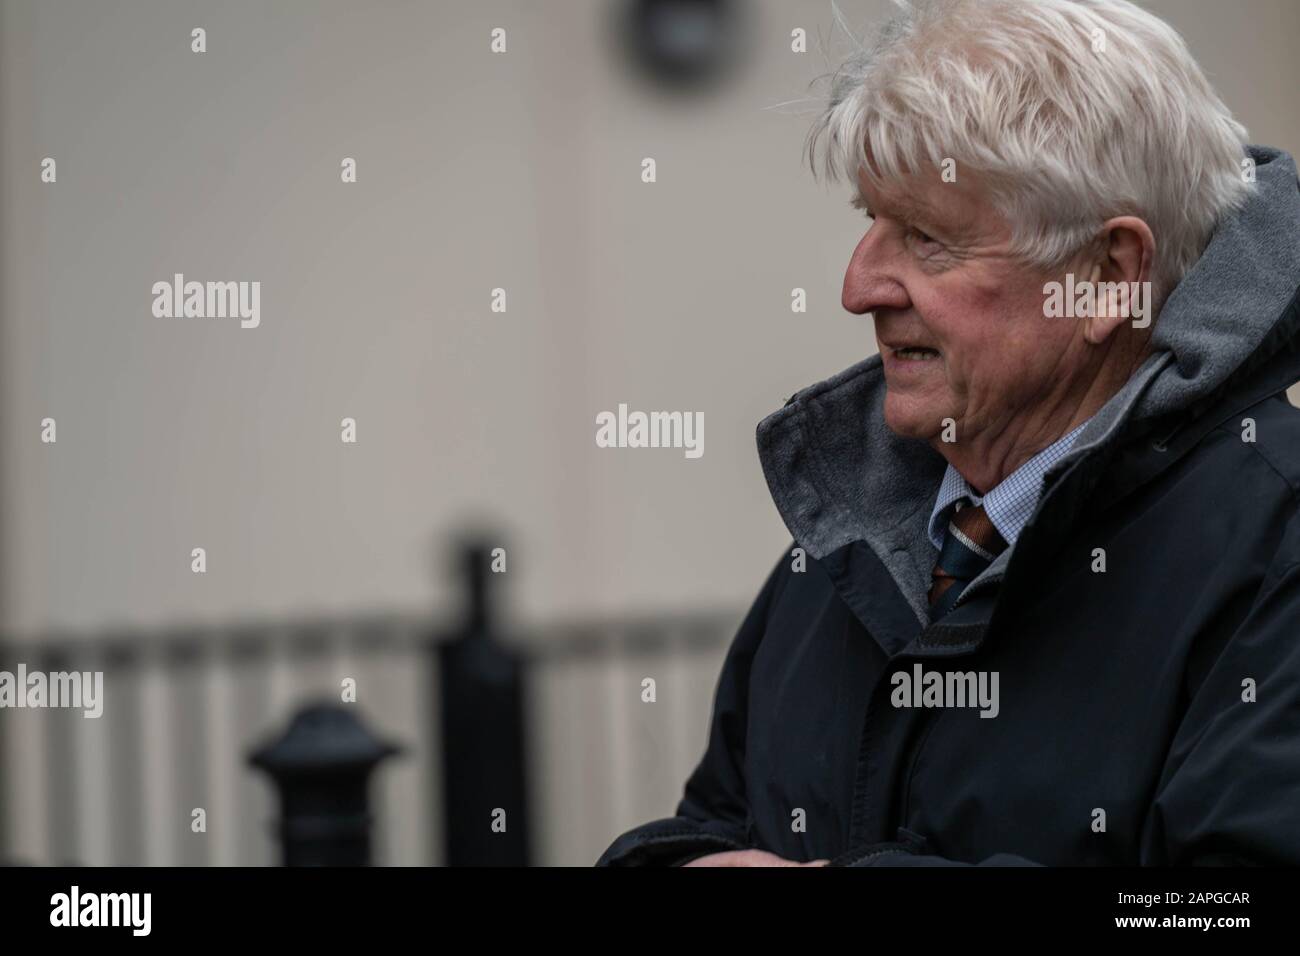 London 22nd Jan. 2020 London 22nd Jan. 2020 Stanley Johnson, Father of Boris Johnson MP PC Prime Minister arrives at Parliament for Prime Ministers Questions Credit: Ian Davidson/Alamy Live News Stock Photo